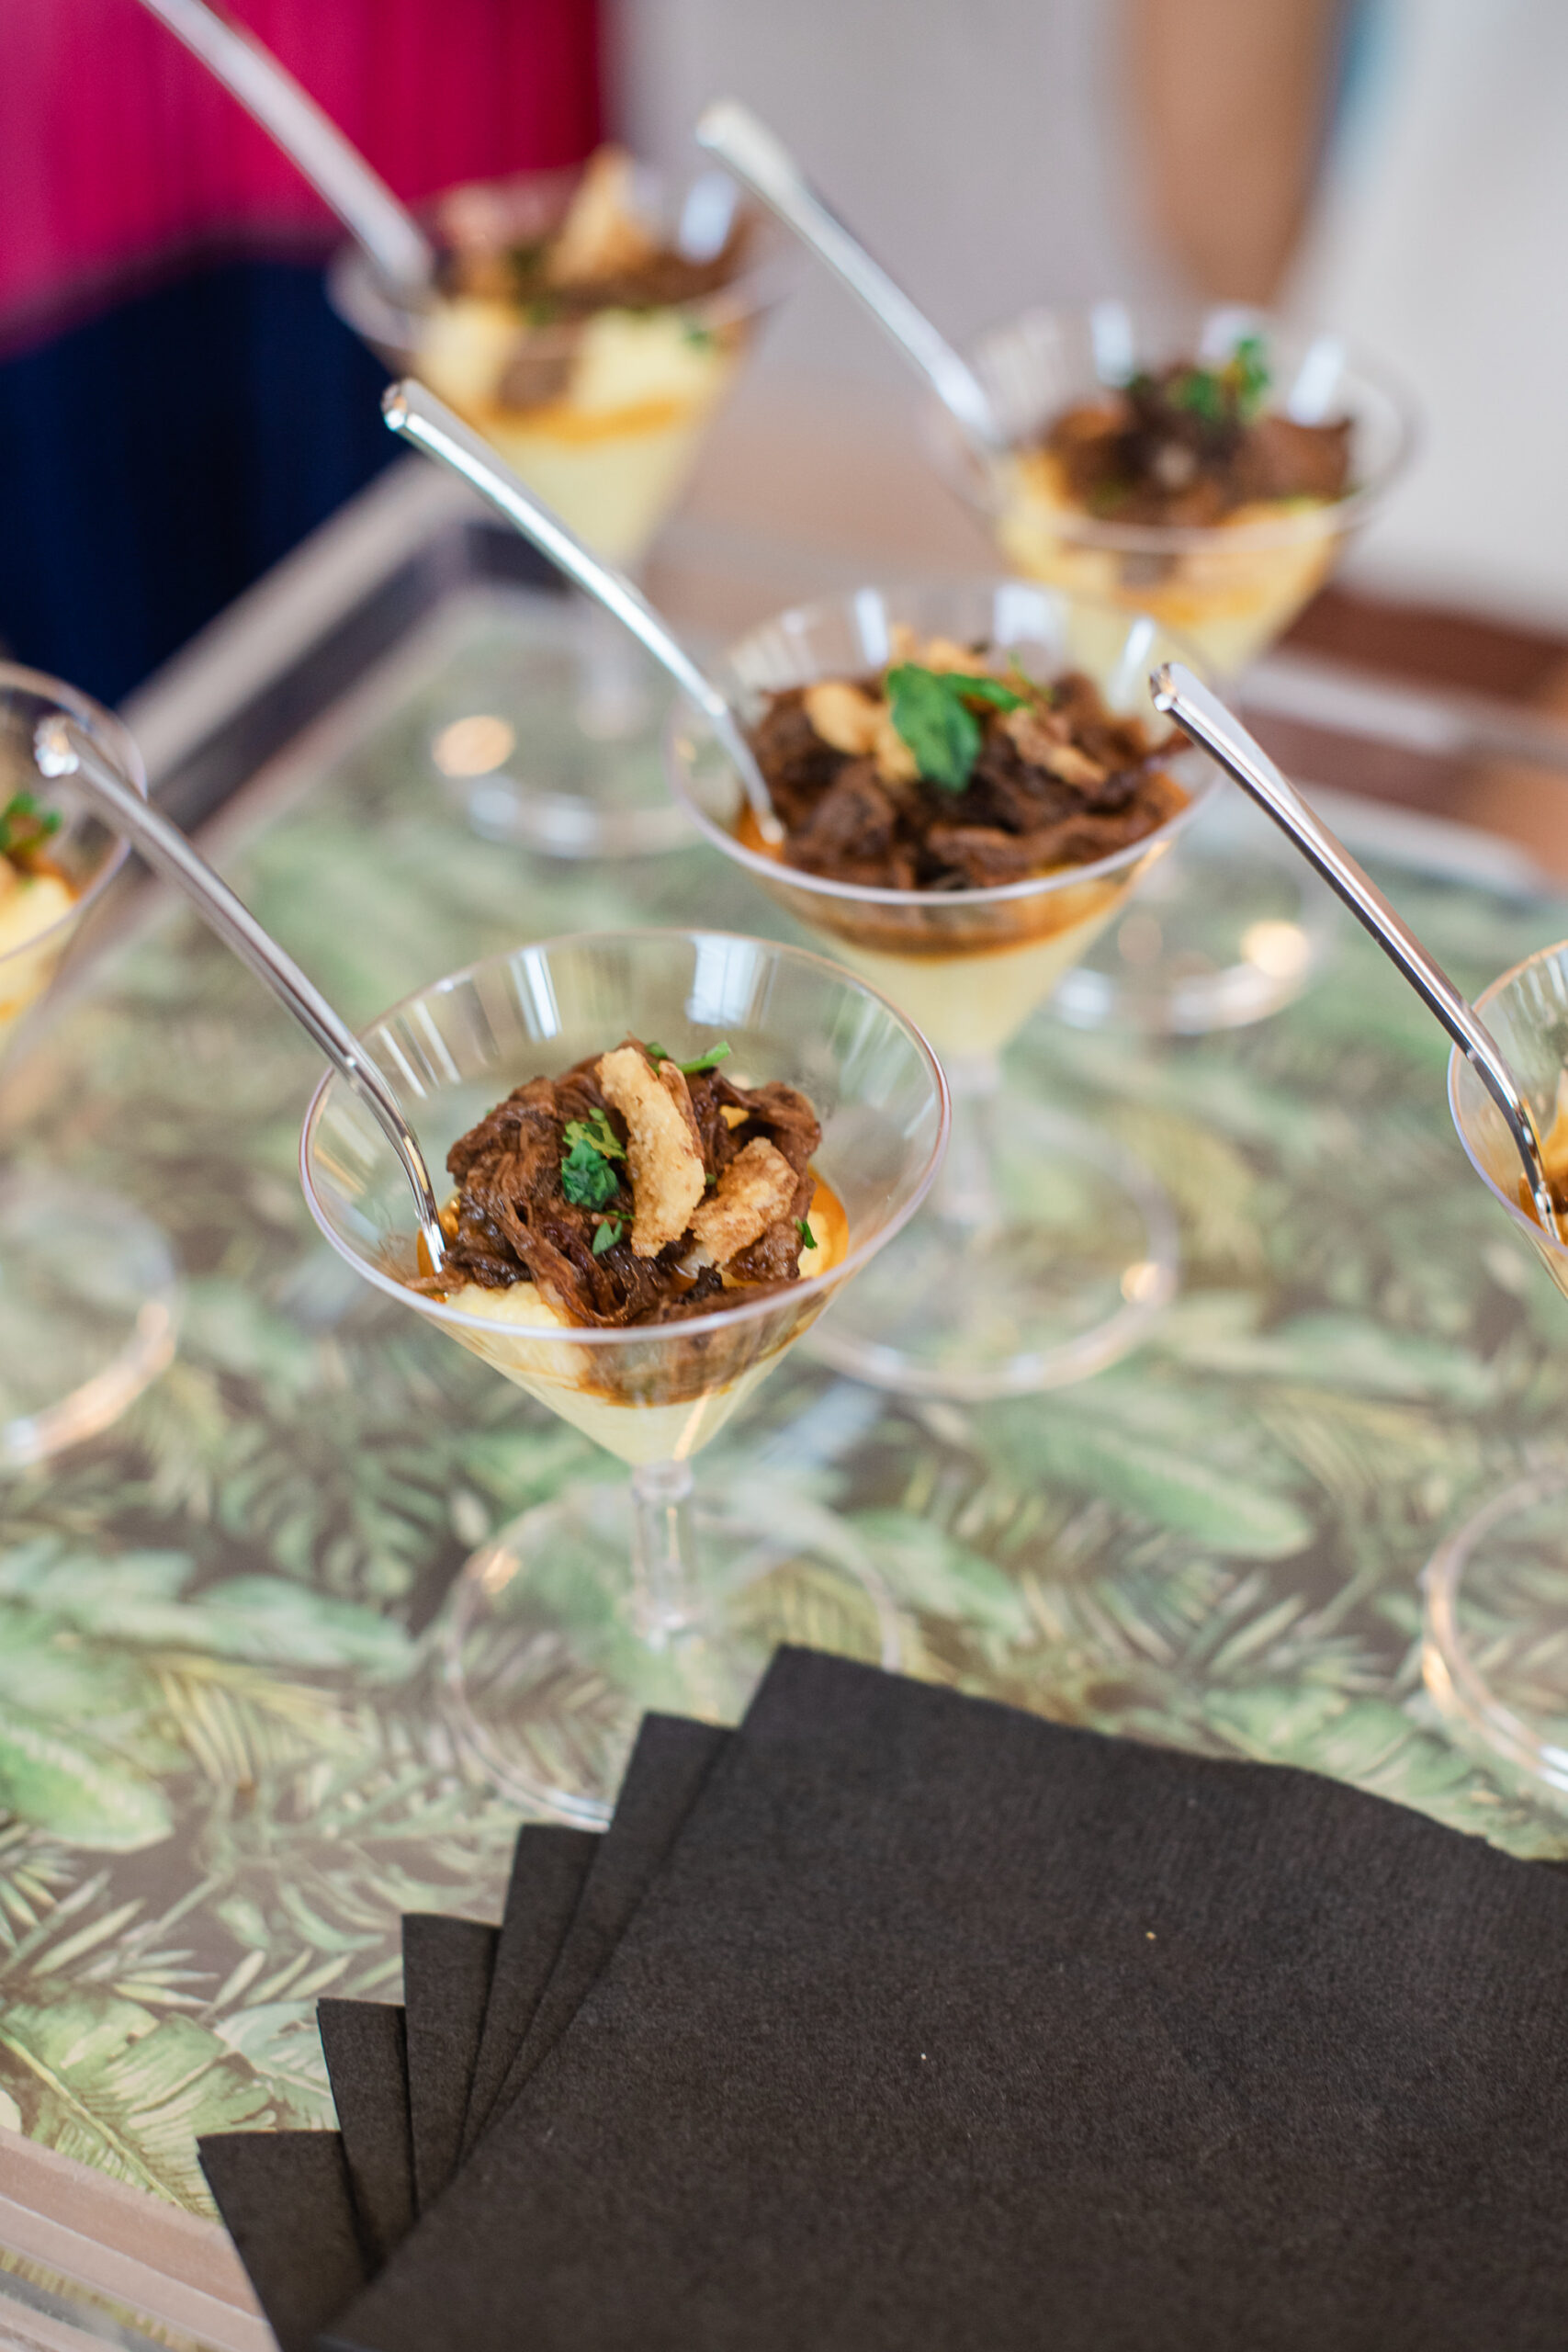 Hors d'oeuvre Martini Glass Inspiration | Tampa Bay Caterer Elite Events Catering